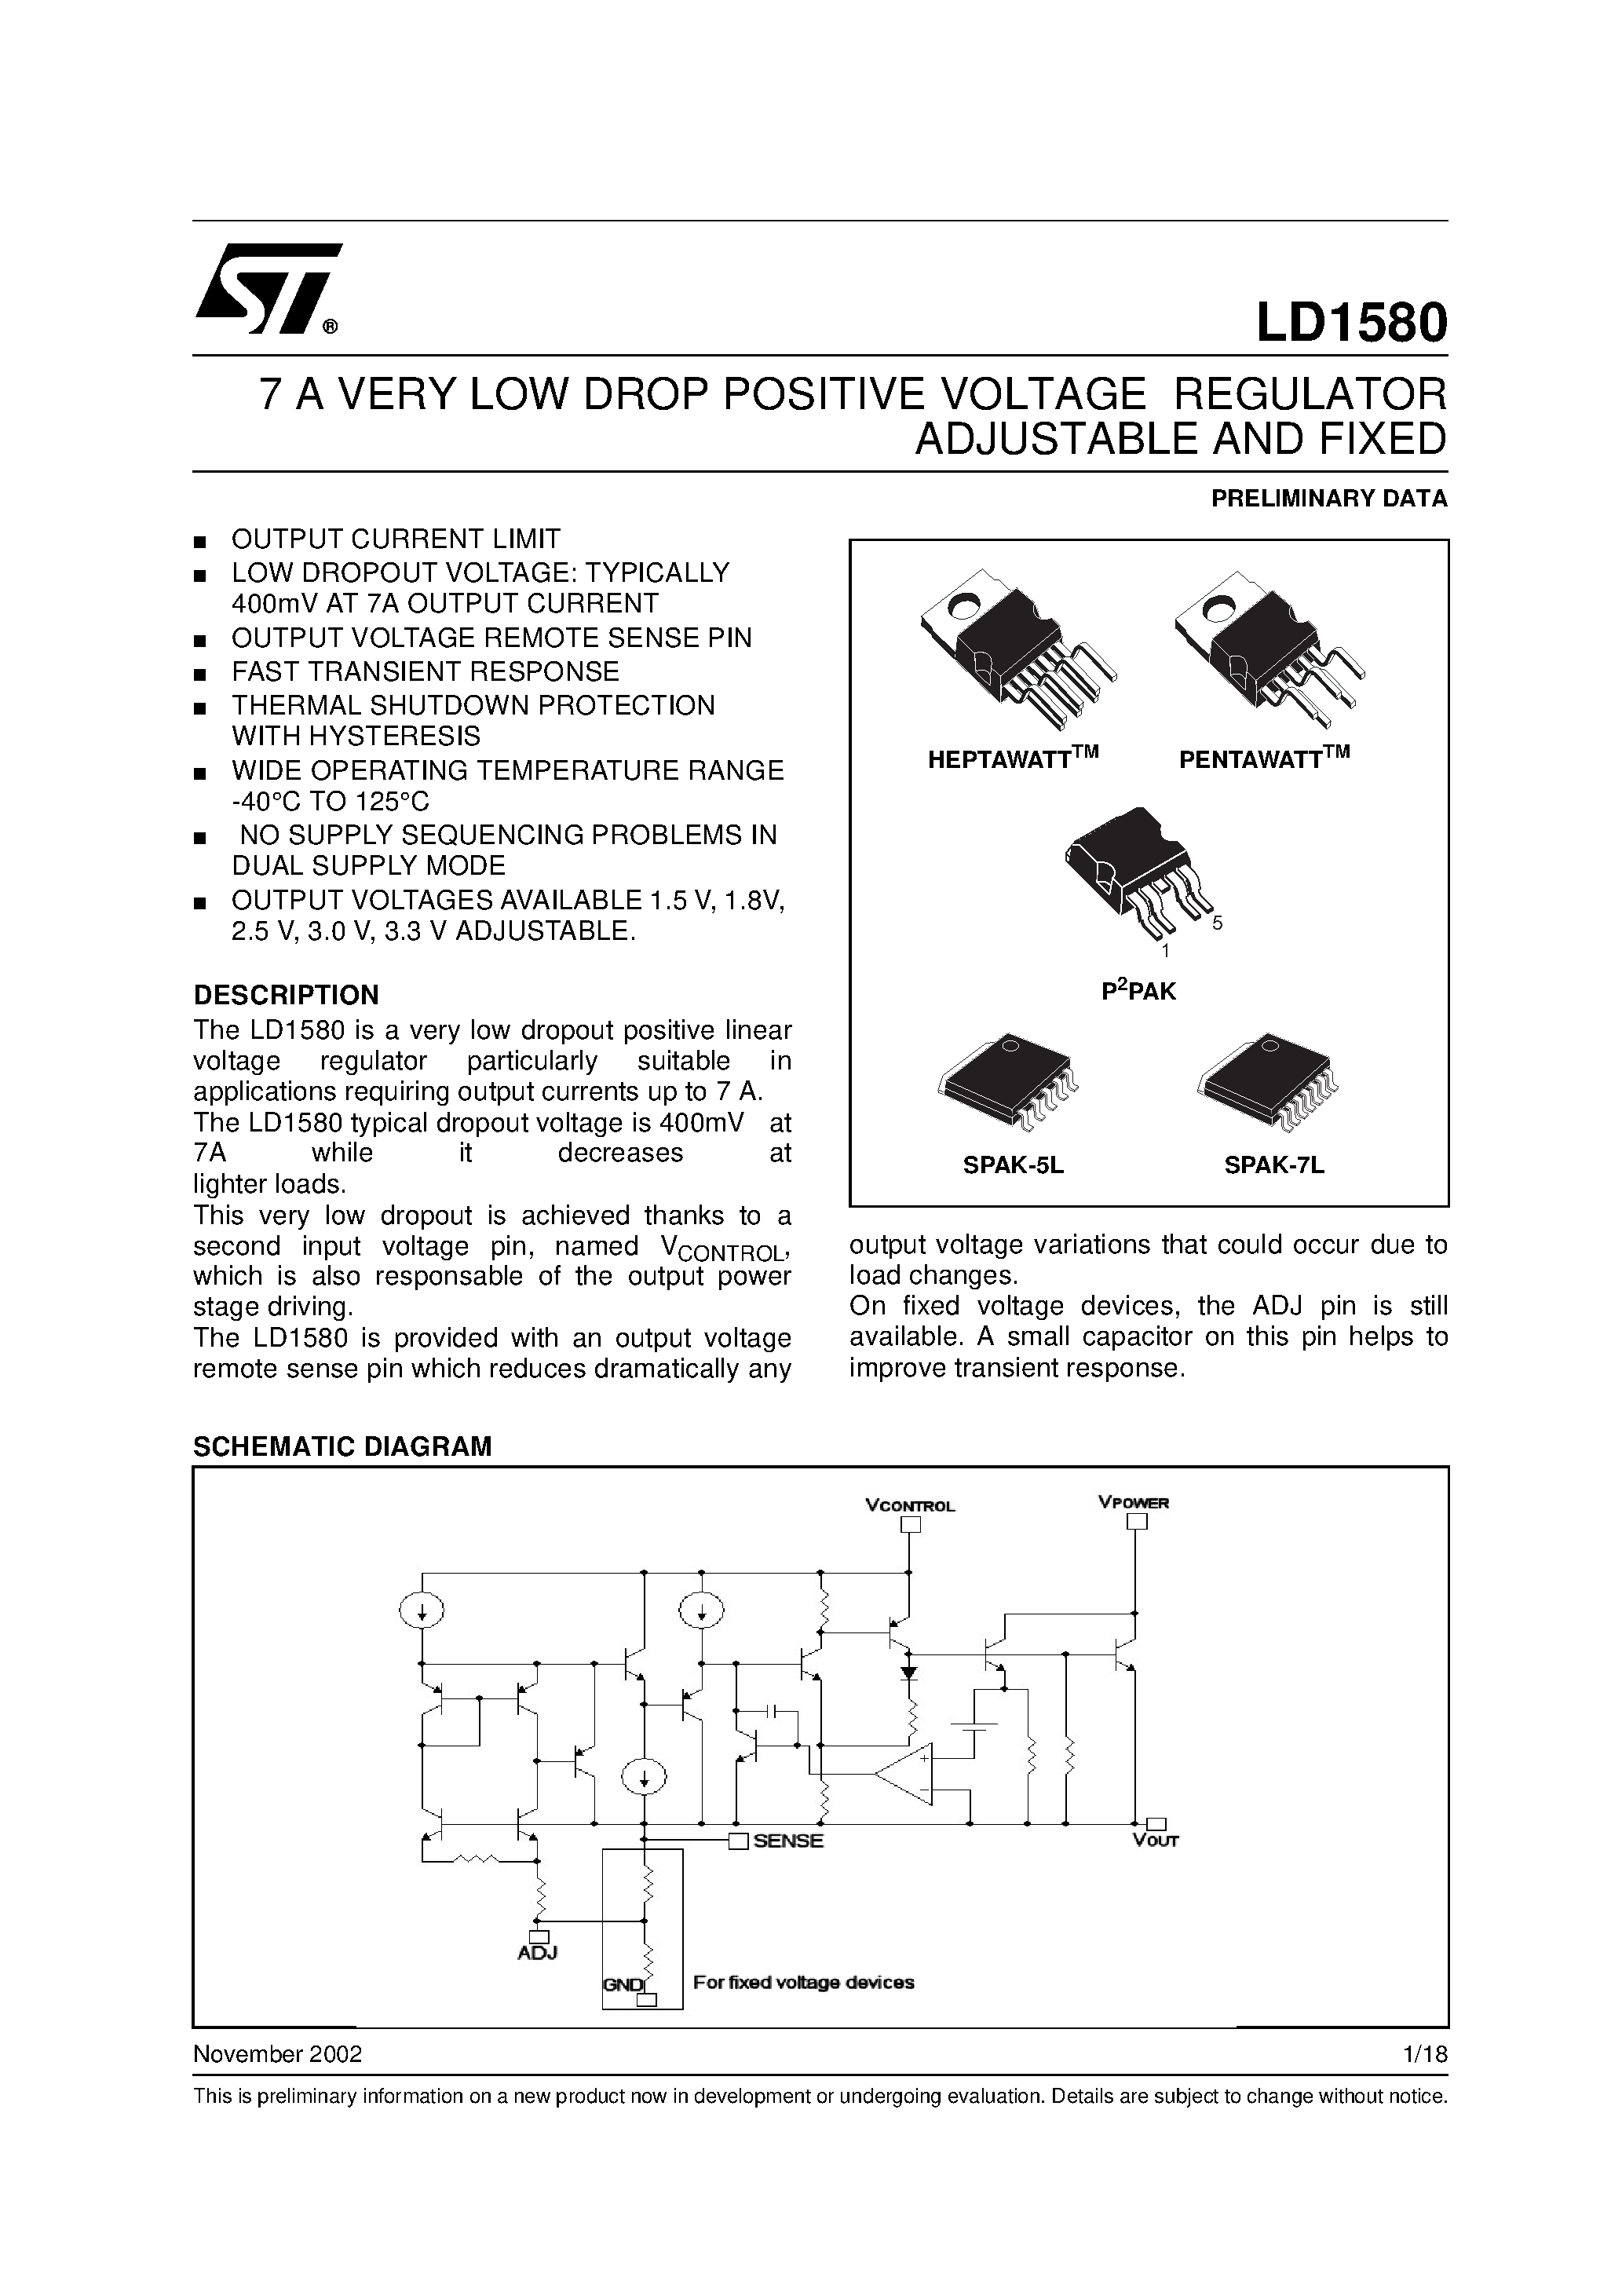 Даташит LD1580 - 7 A VERY LOW DROP POSITIVE VOLTAGE REGULATOR ADJUSTABLE AND FIXED страница 1